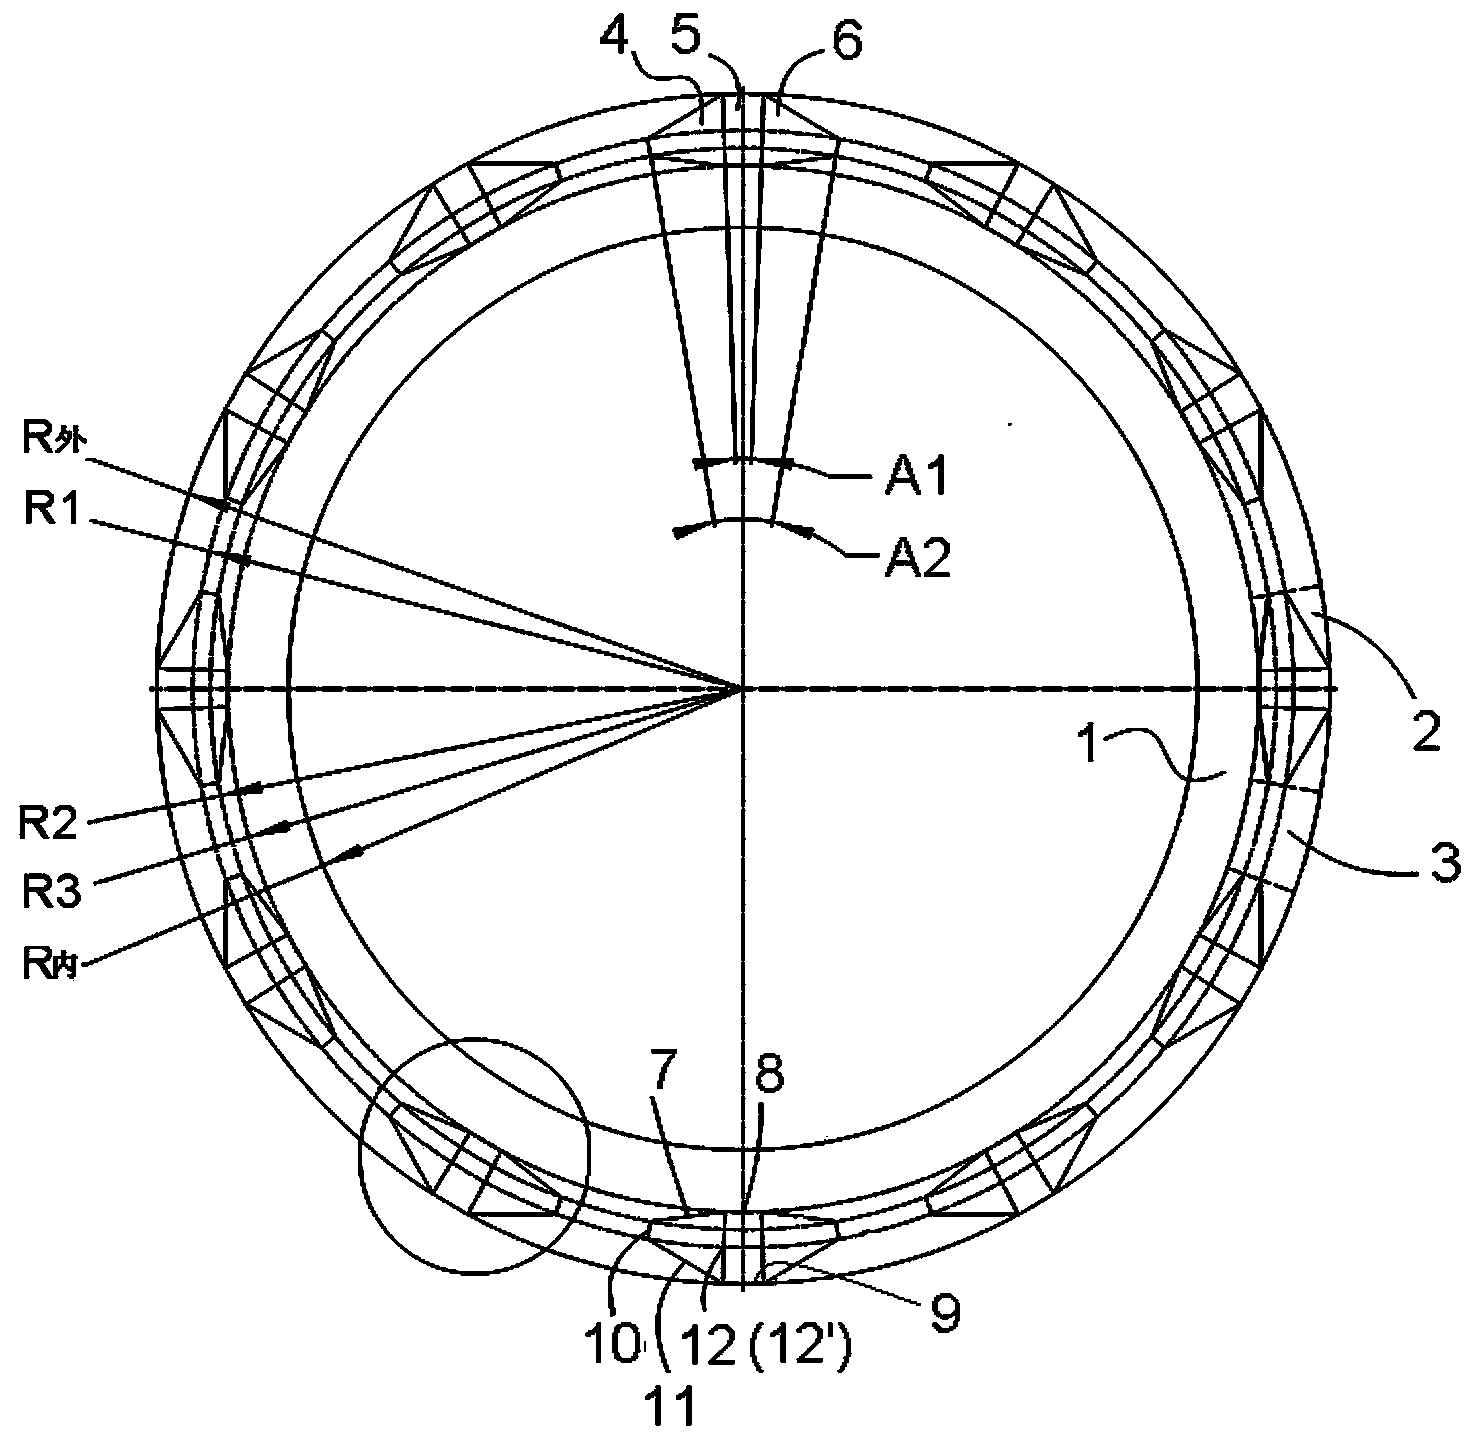 Non-contact mechanical seal ring with dual-rotating-direction hydrodynamic grooves